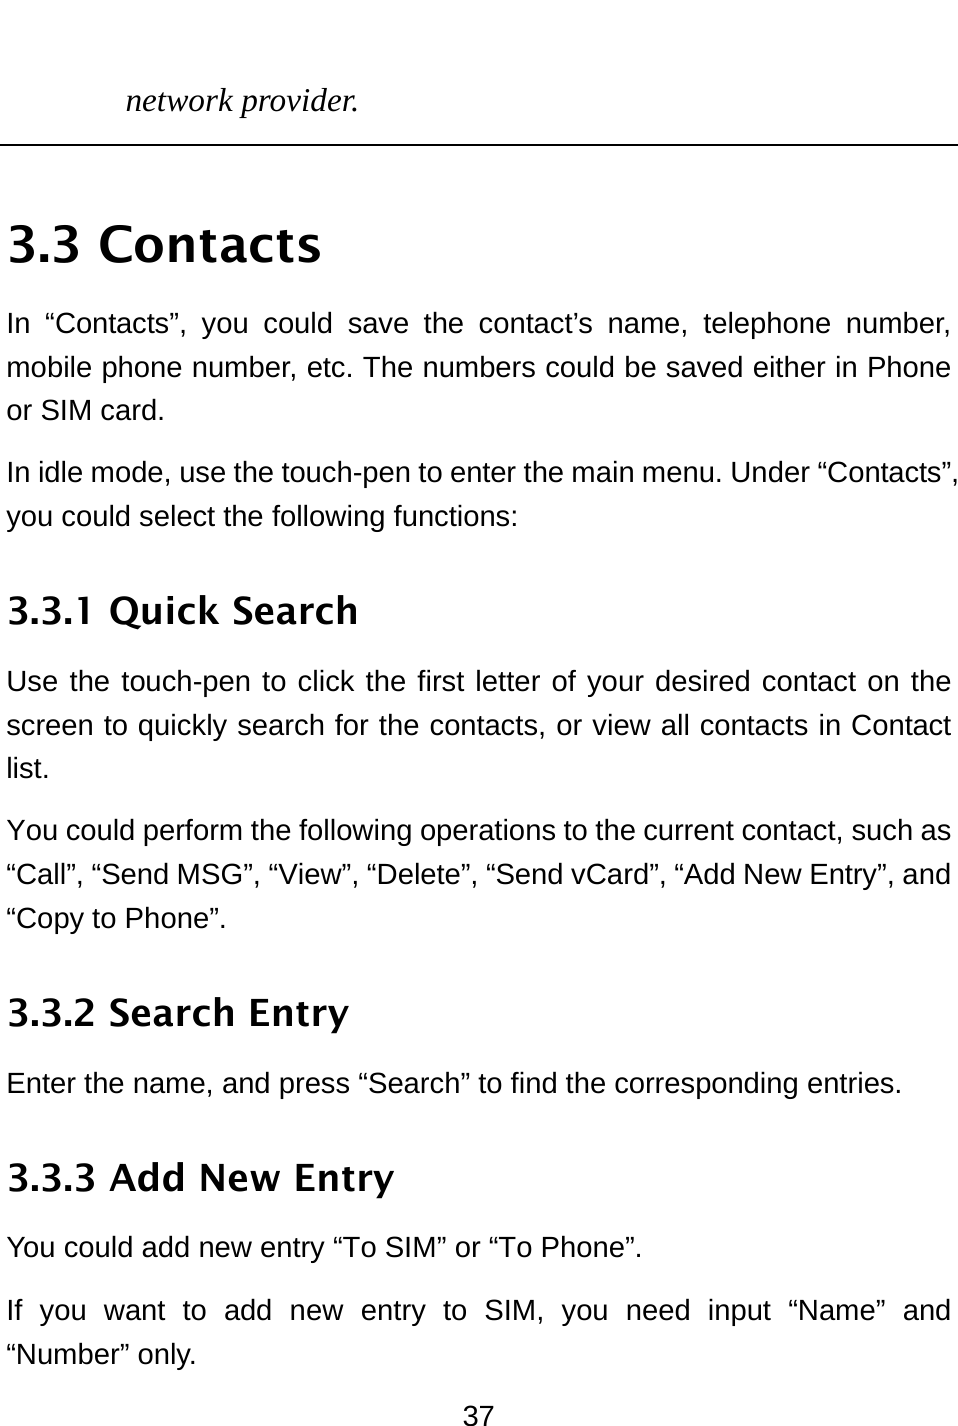  37 network provider.  3.3 Contacts In “Contacts”, you could save the contact’s name, telephone number, mobile phone number, etc. The numbers could be saved either in Phone or SIM card.   In idle mode, use the touch-pen to enter the main menu. Under “Contacts”, you could select the following functions: 3.3.1 Quick Search Use the touch-pen to click the first letter of your desired contact on the screen to quickly search for the contacts, or view all contacts in Contact list.  You could perform the following operations to the current contact, such as “Call”, “Send MSG”, “View”, “Delete”, “Send vCard”, “Add New Entry”, and “Copy to Phone”. 3.3.2 Search Entry Enter the name, and press “Search” to find the corresponding entries. 3.3.3 Add New Entry You could add new entry “To SIM” or “To Phone”. If you want to add new entry to SIM, you need input “Name” and “Number” only. 